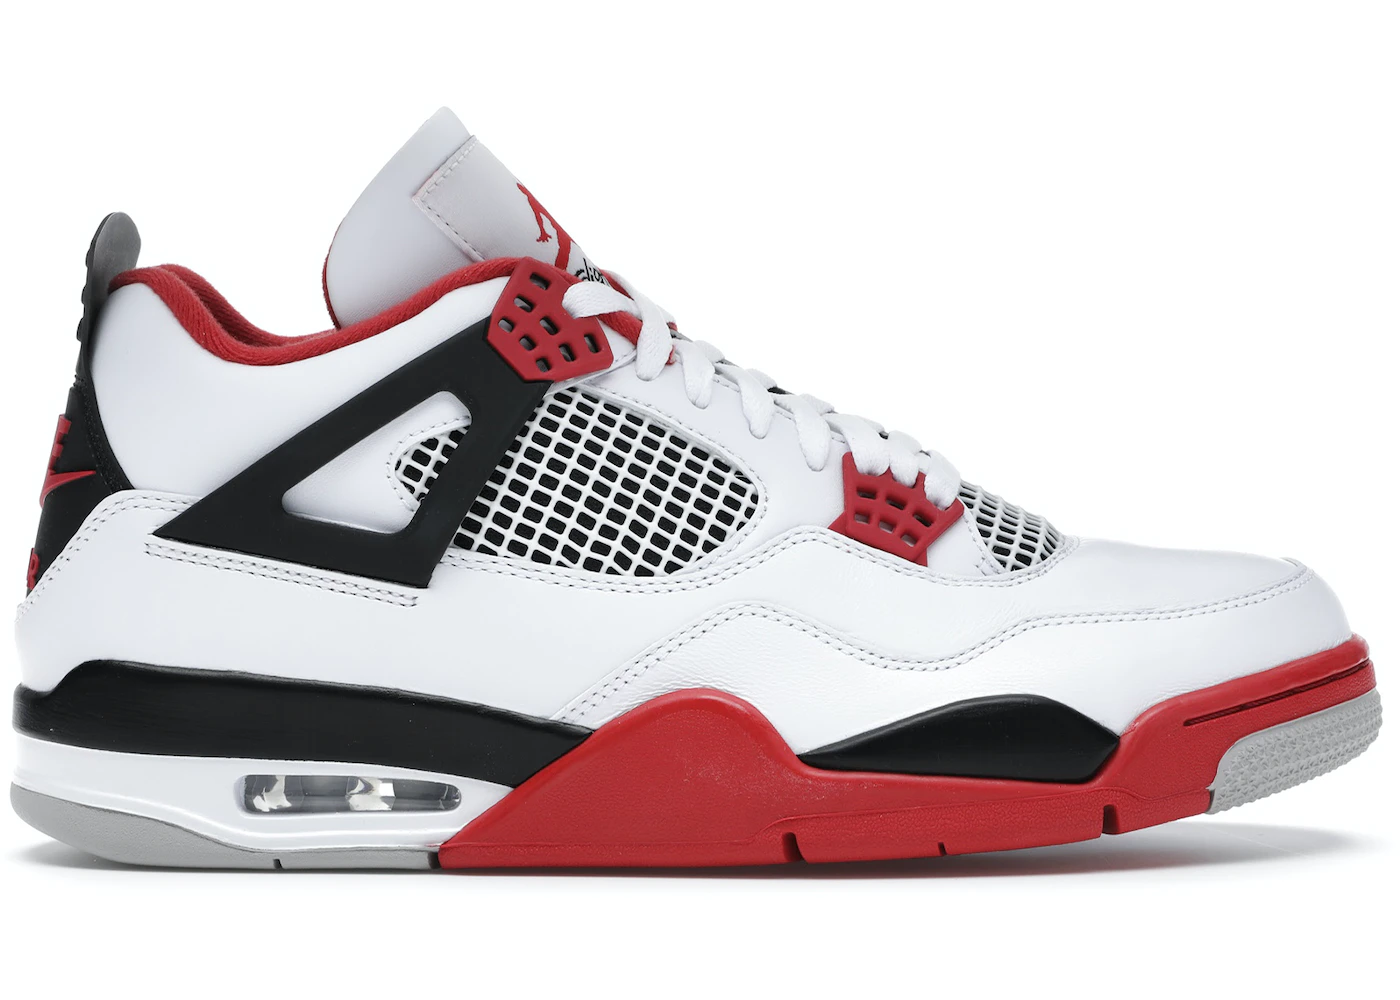 Clean the bedroom response Transition Jordan 4 Retro Fire Red (2020) - DC7770-160